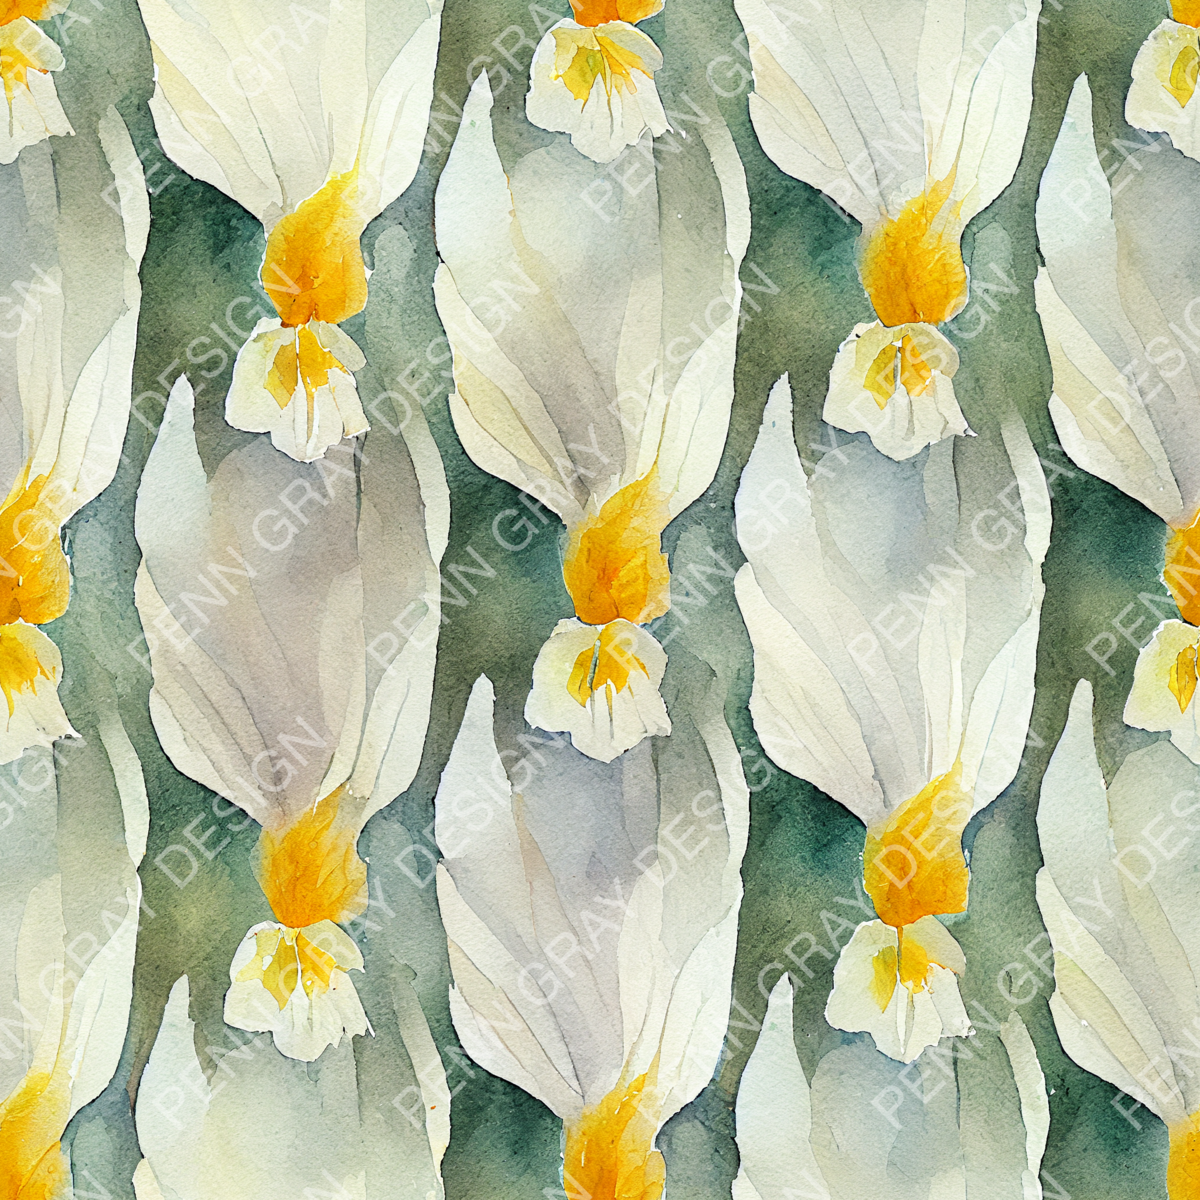 narcissus-06-(watermarked)